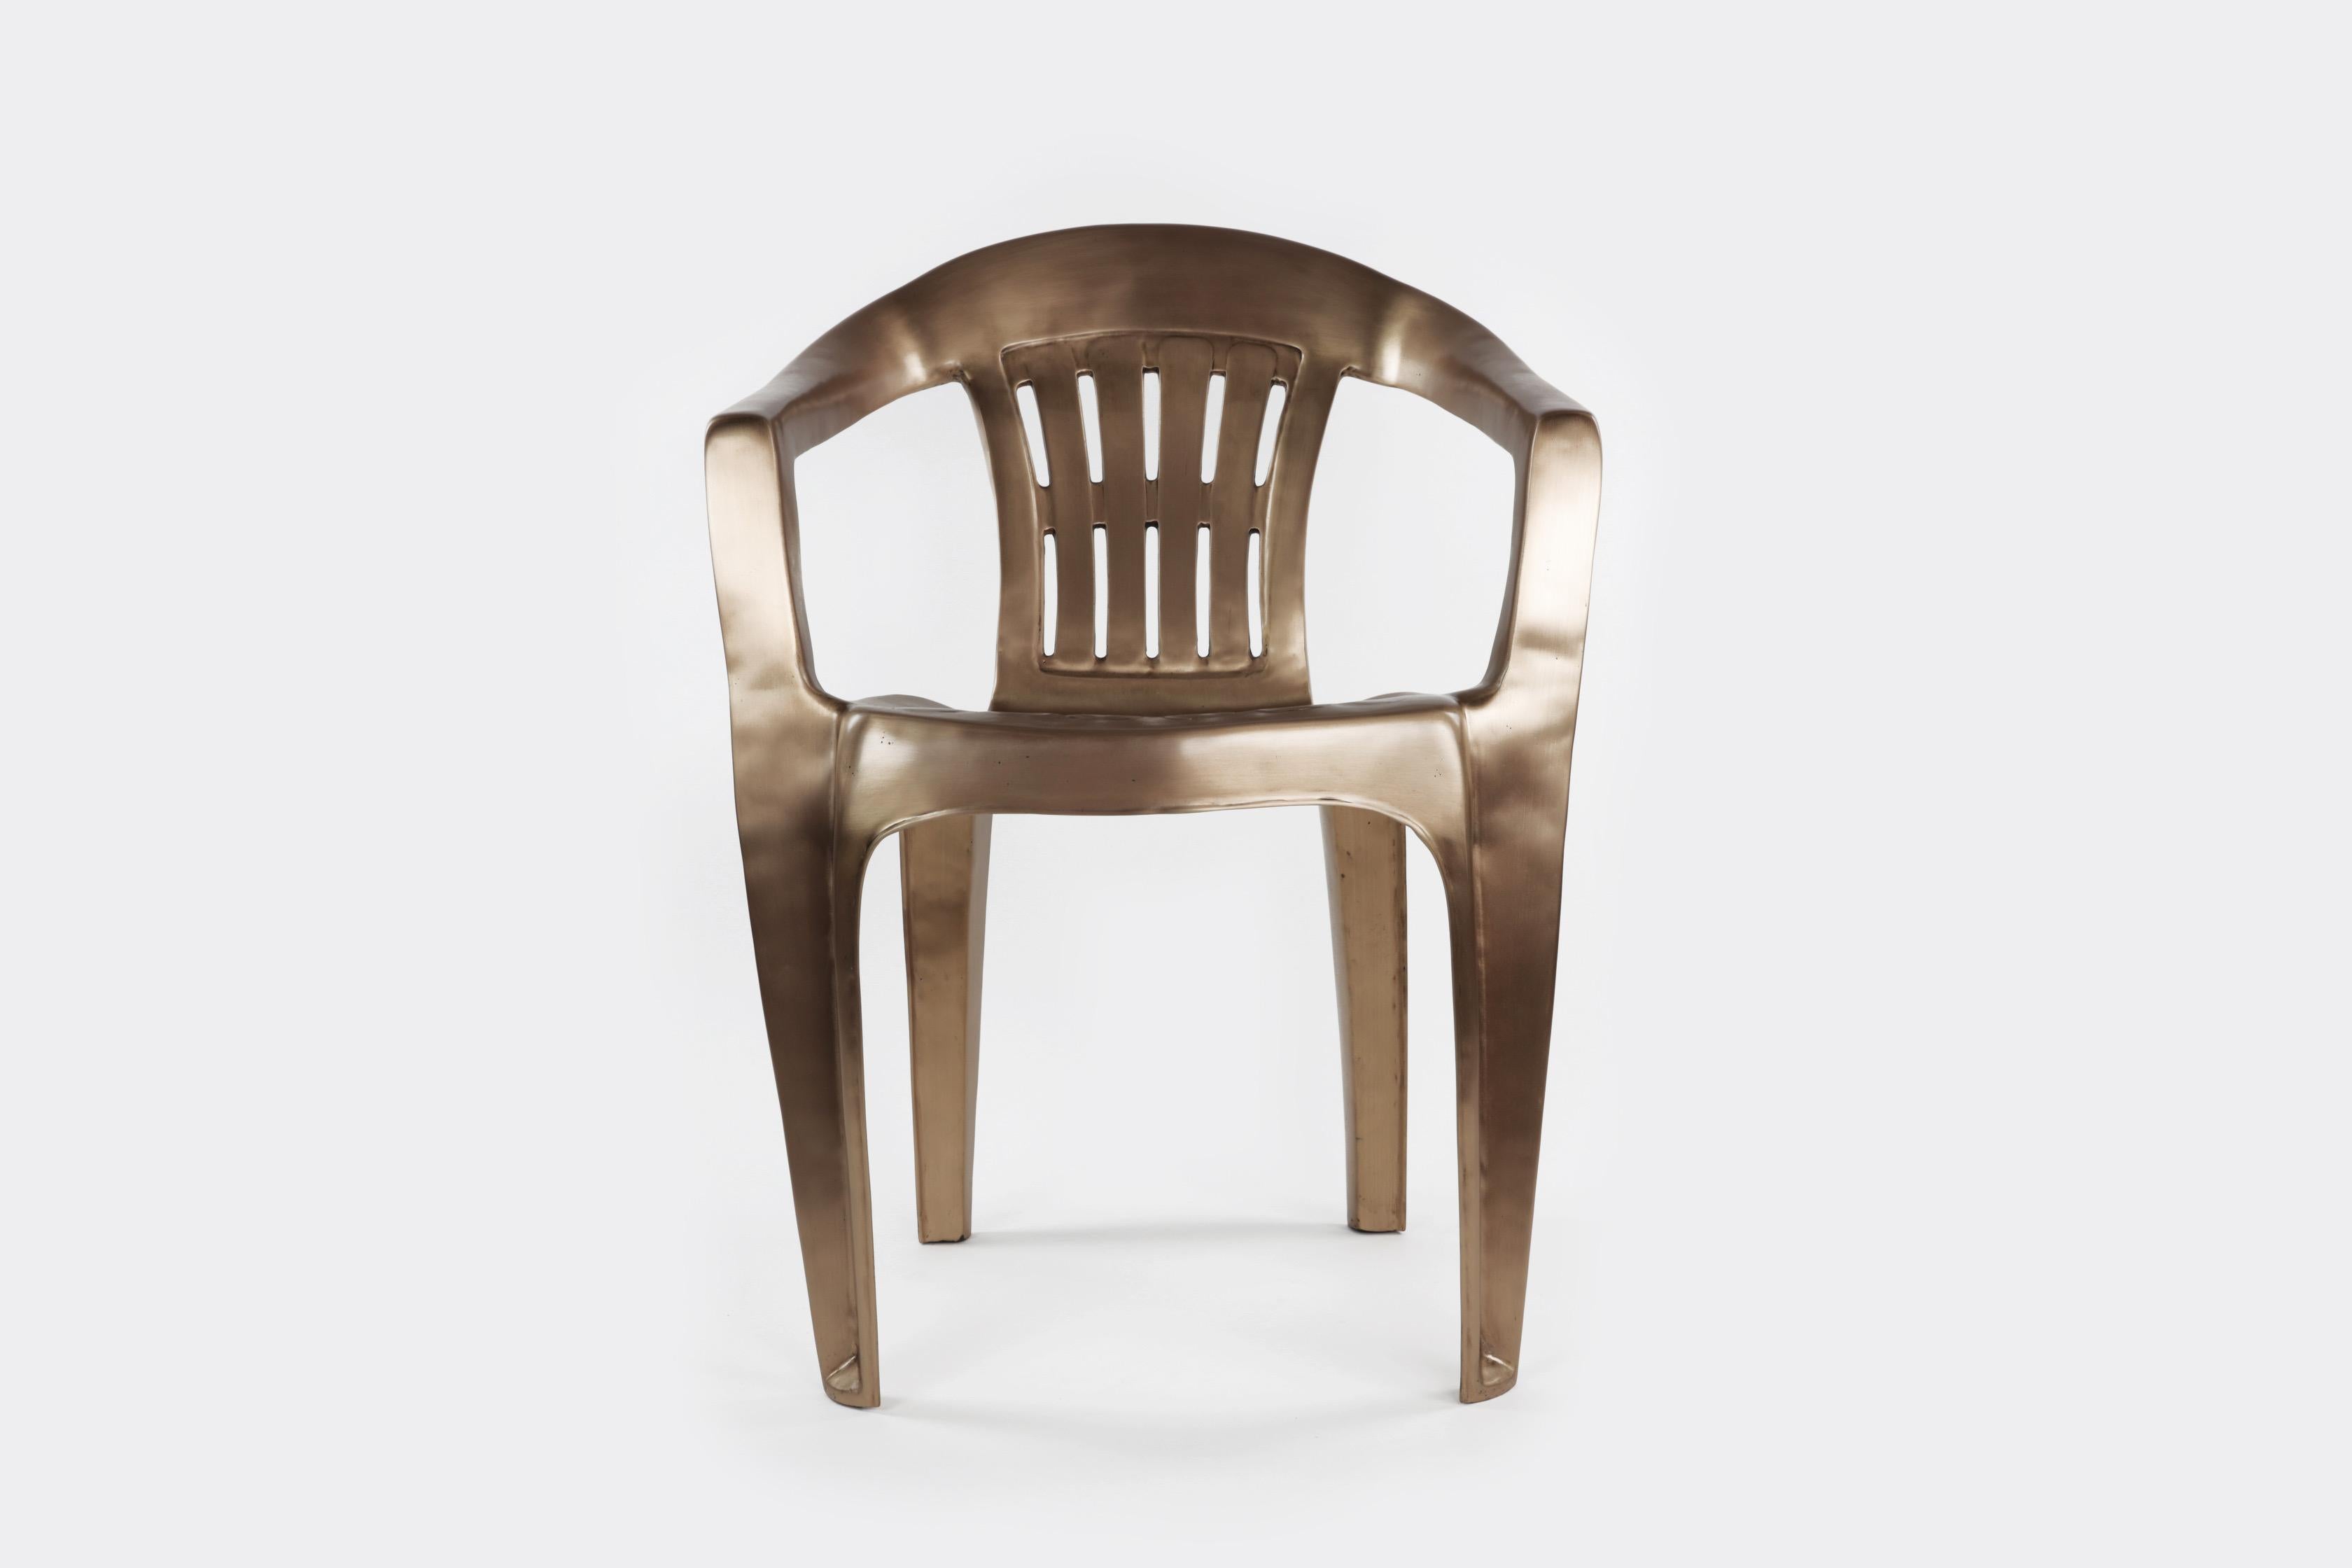 American Non-Disposable Disposable Chair in Solid Bronze by Christopher Kreiling For Sale